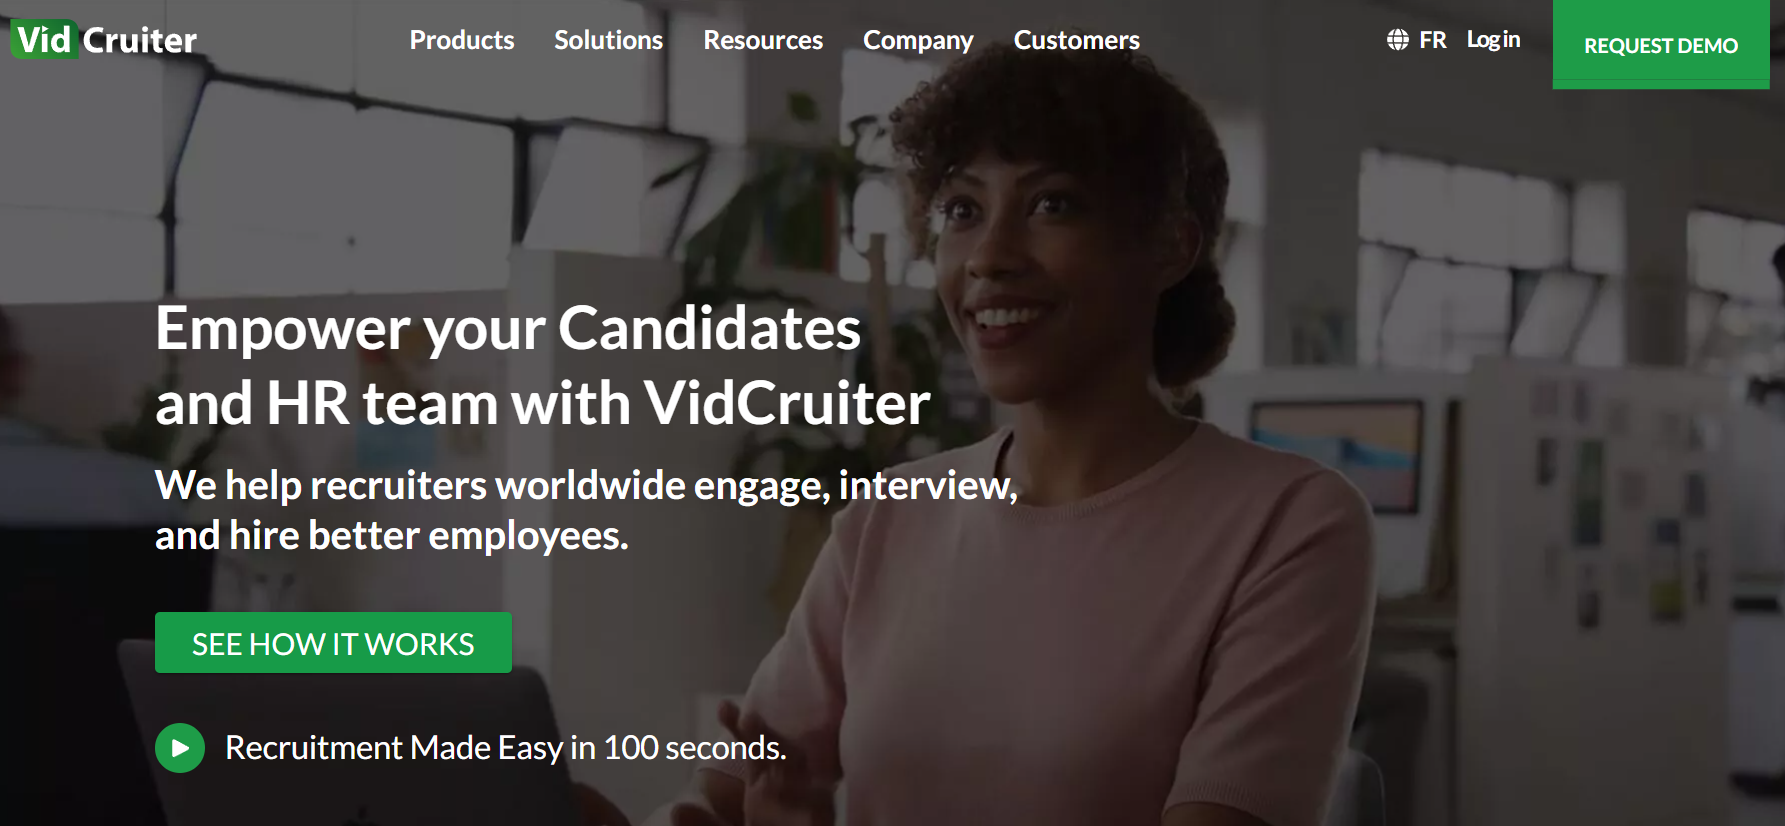 Empower your candidates with VidCruiter